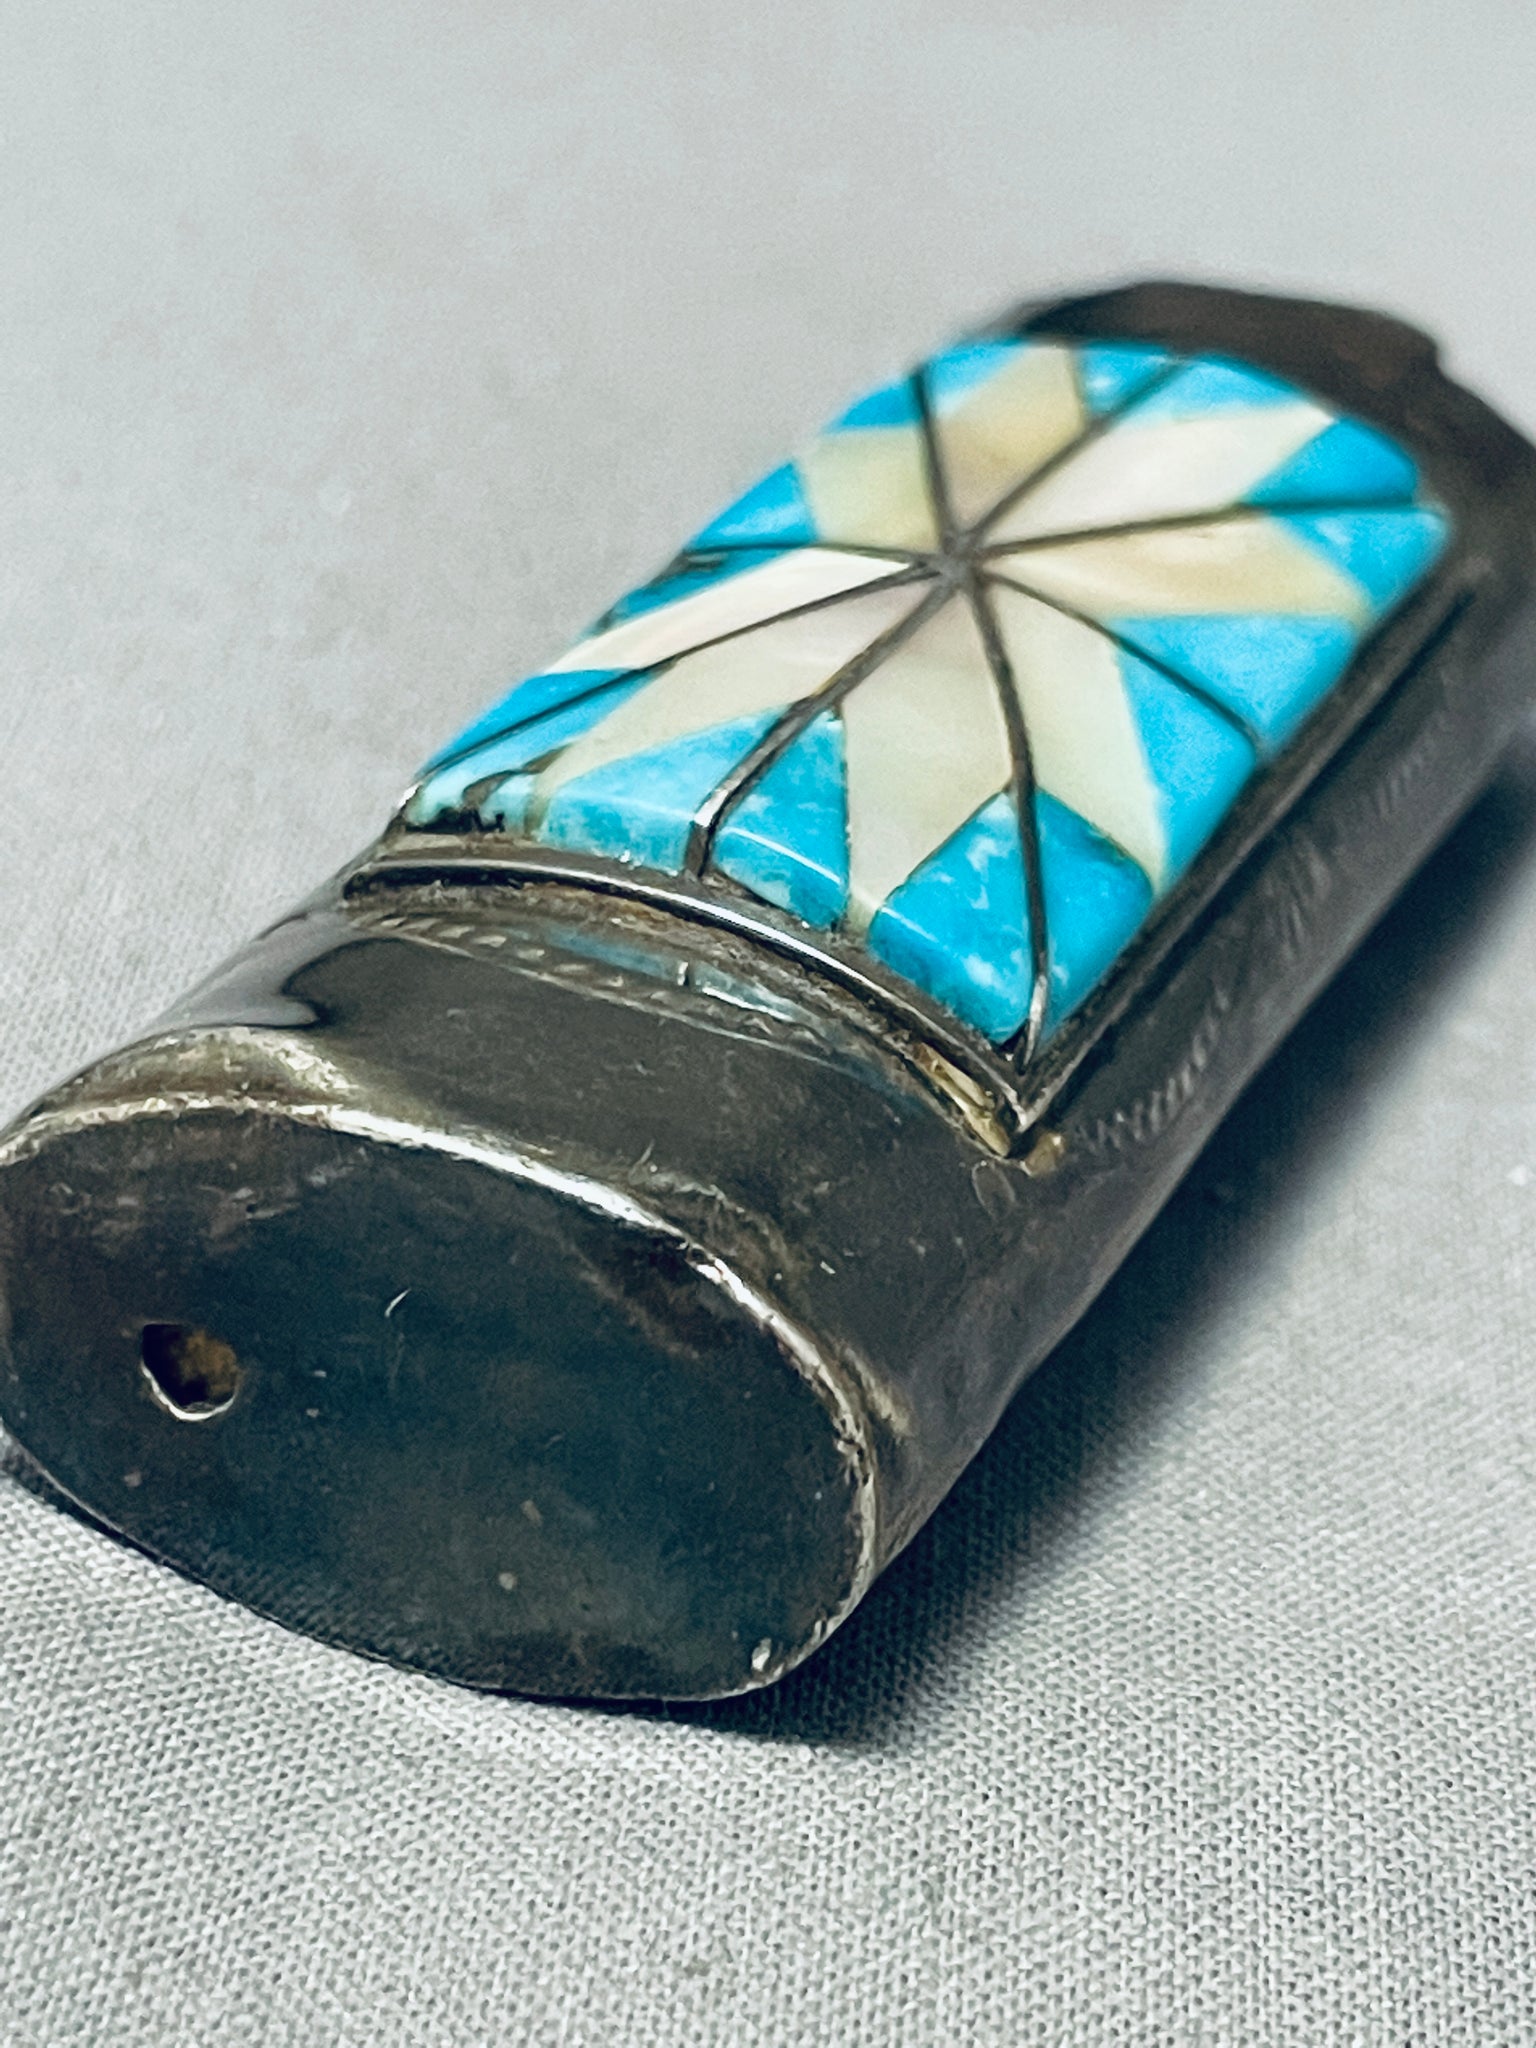 Native American Bic Lighter Cases